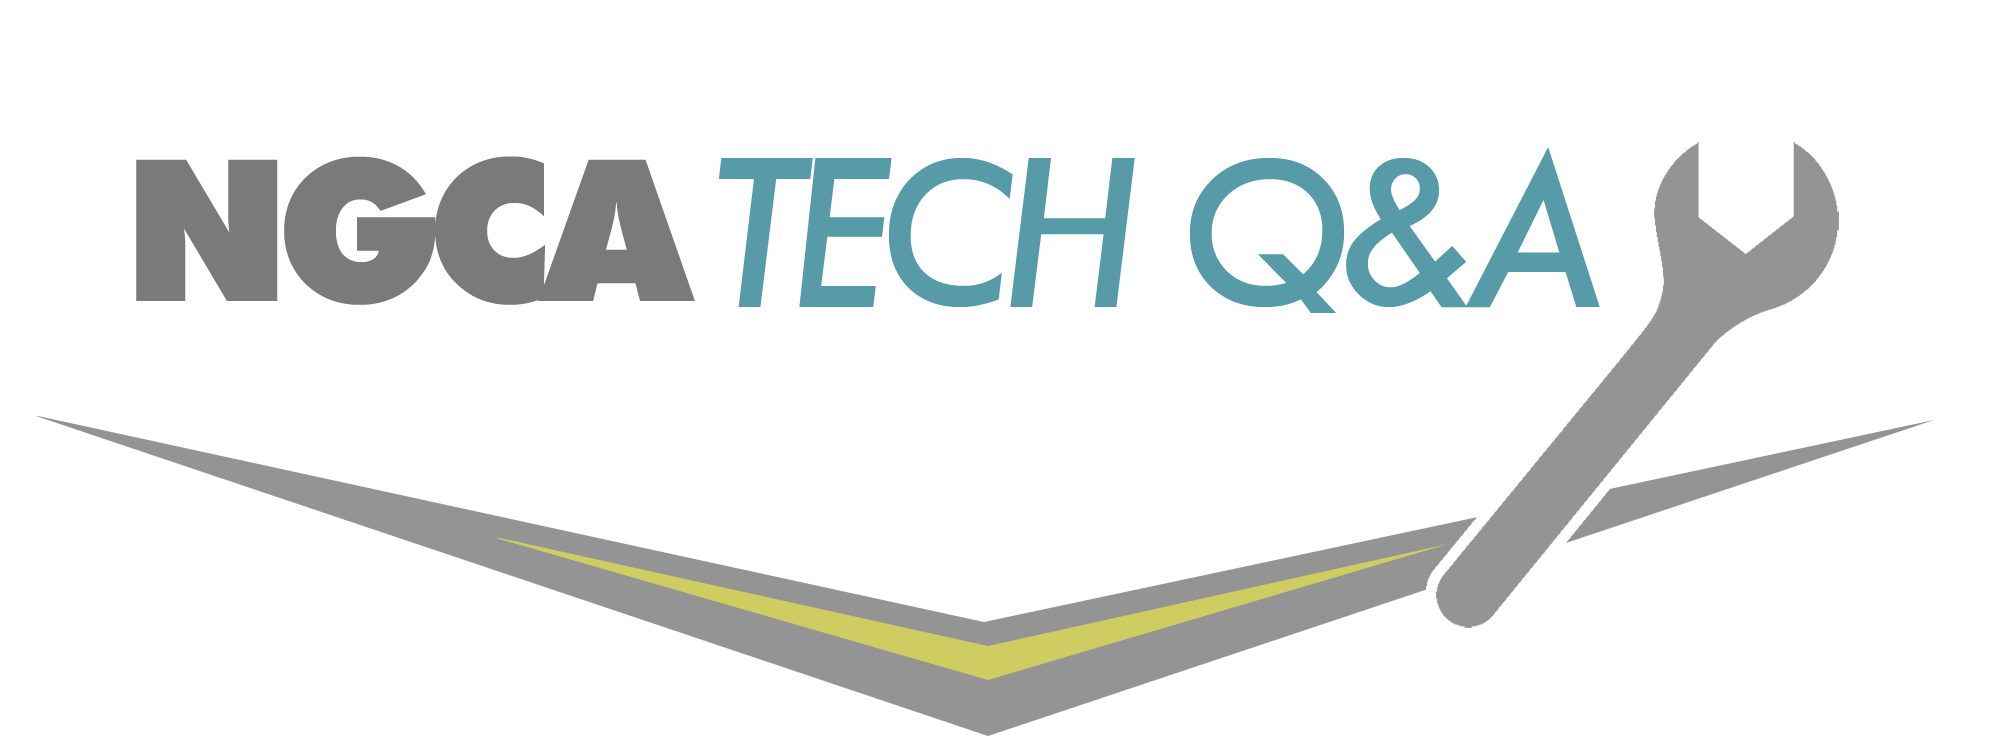 Natural Glass Tech Questions and Answers faq